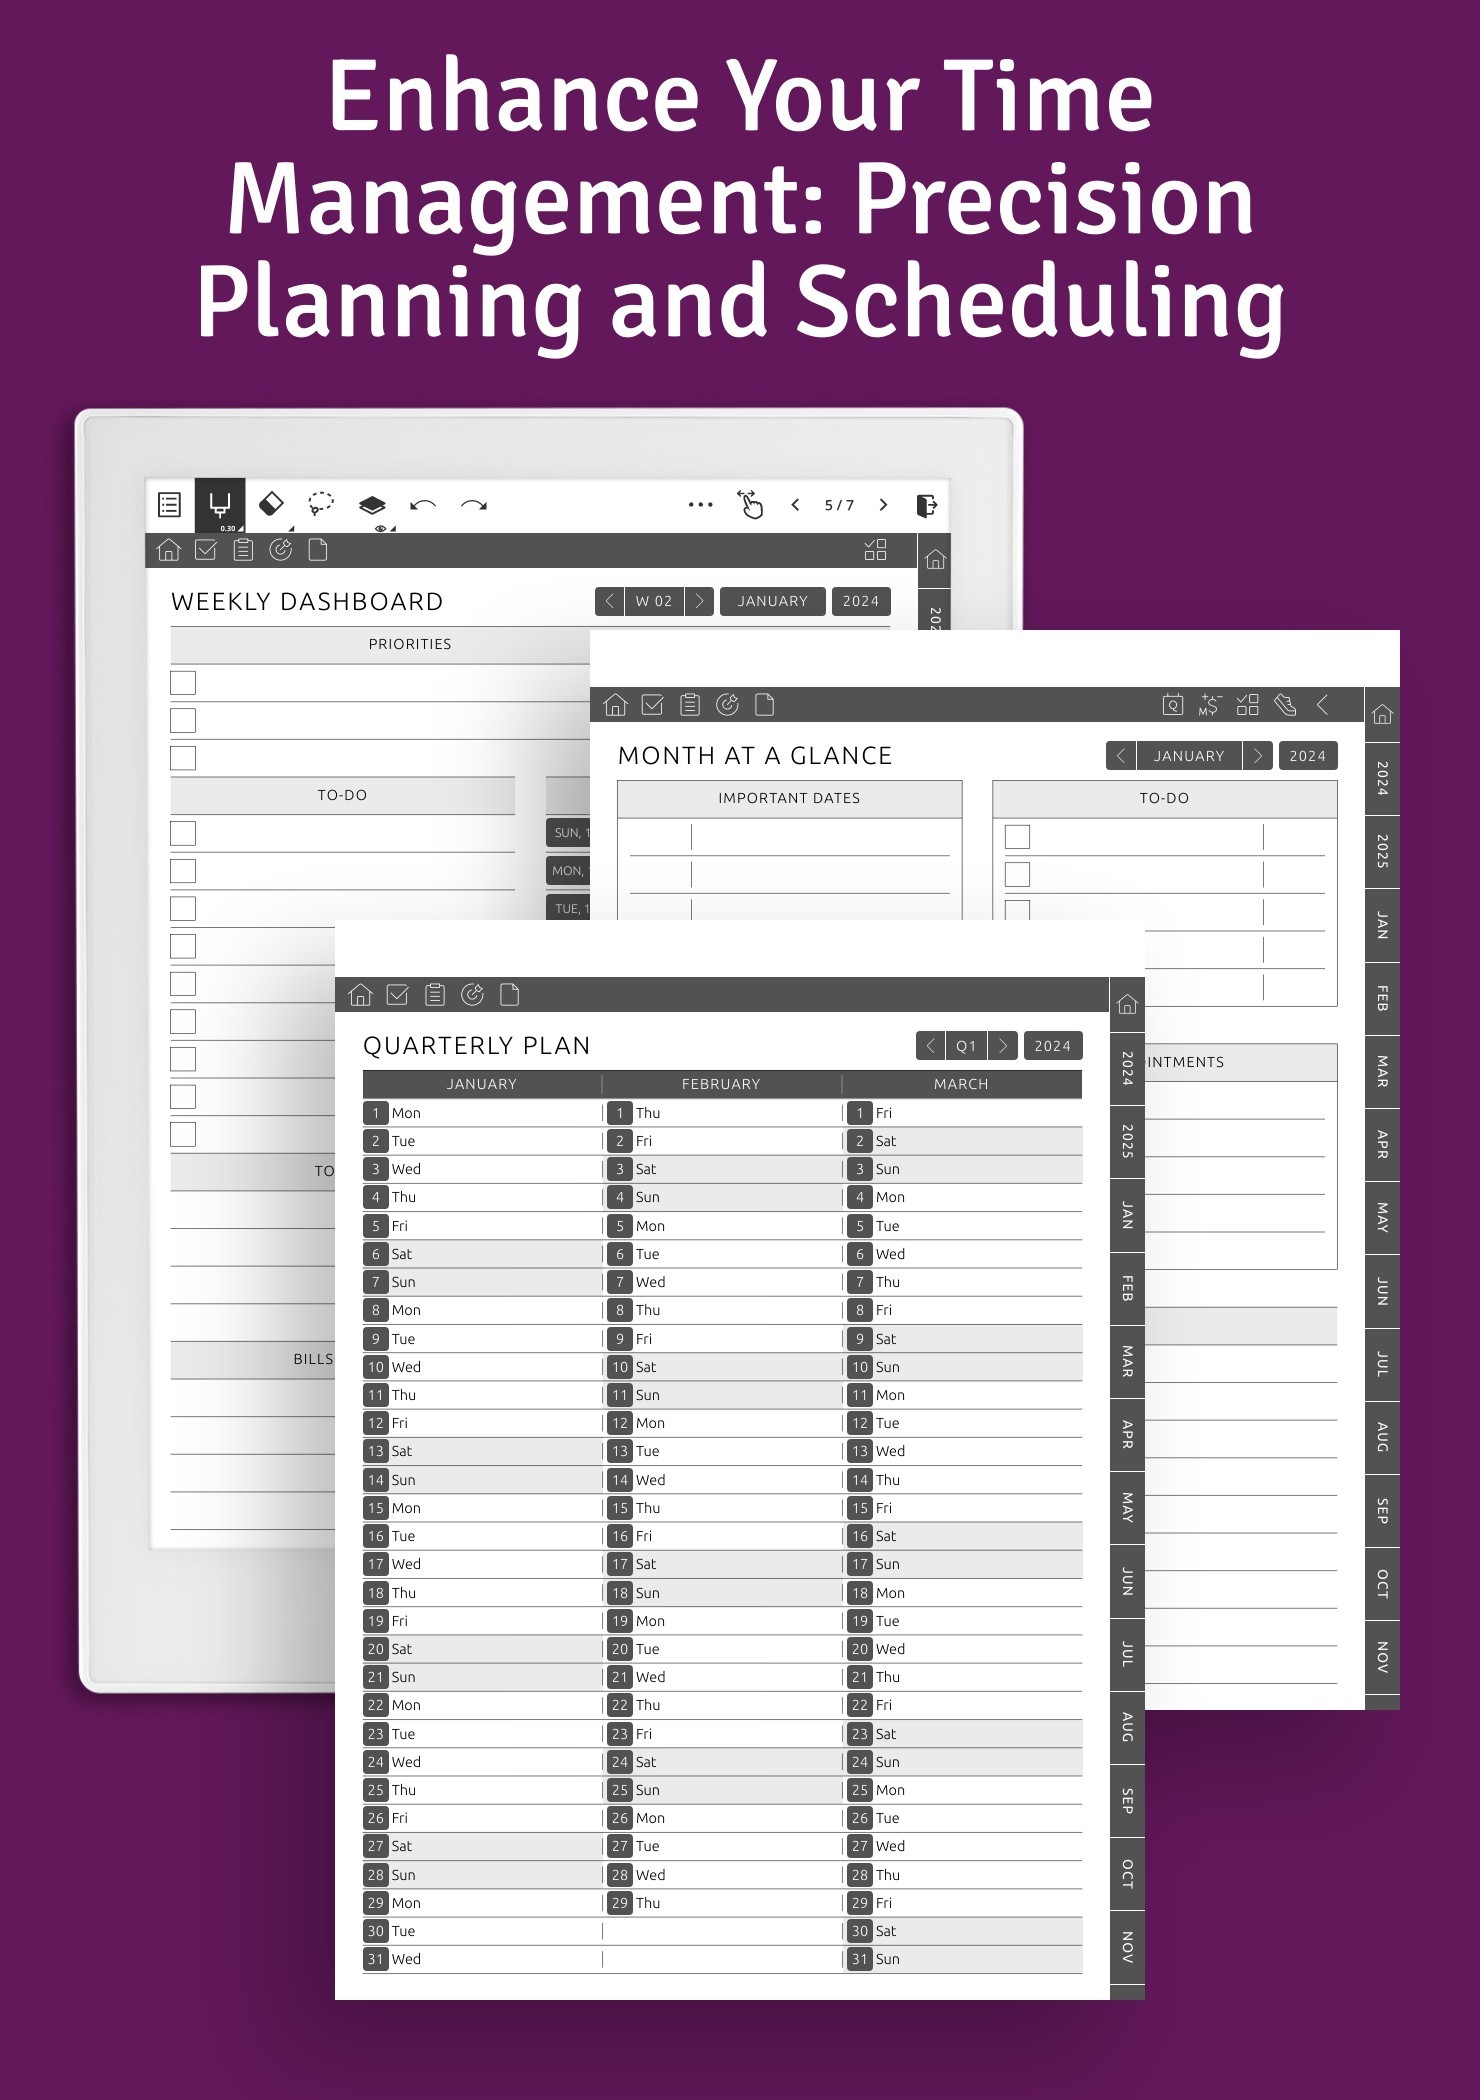 Optimize Your Time Management: Precision Planning and Scheduling